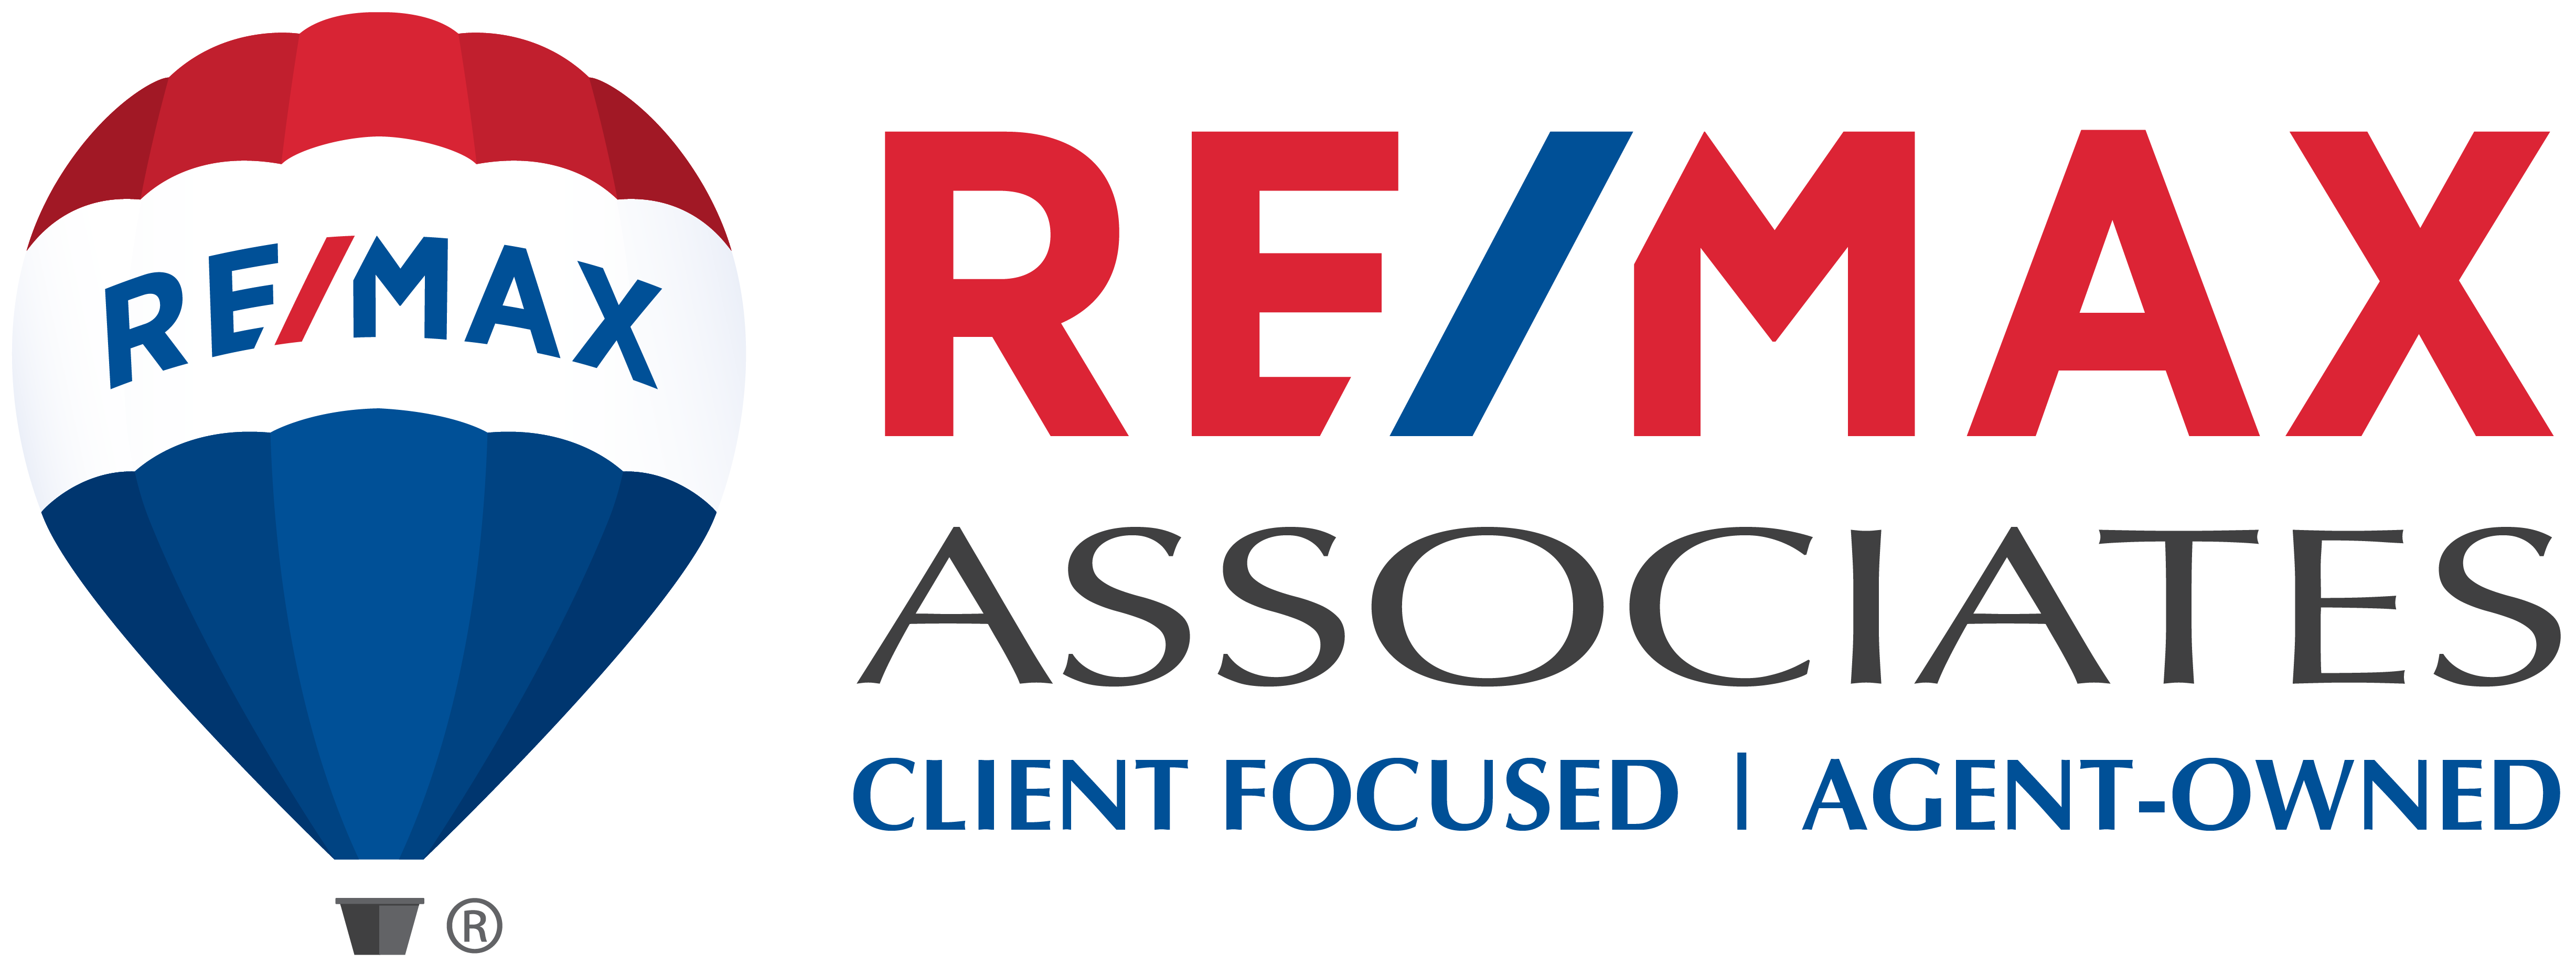 RE/MAX Associates - Client Focused | Agent-Owned